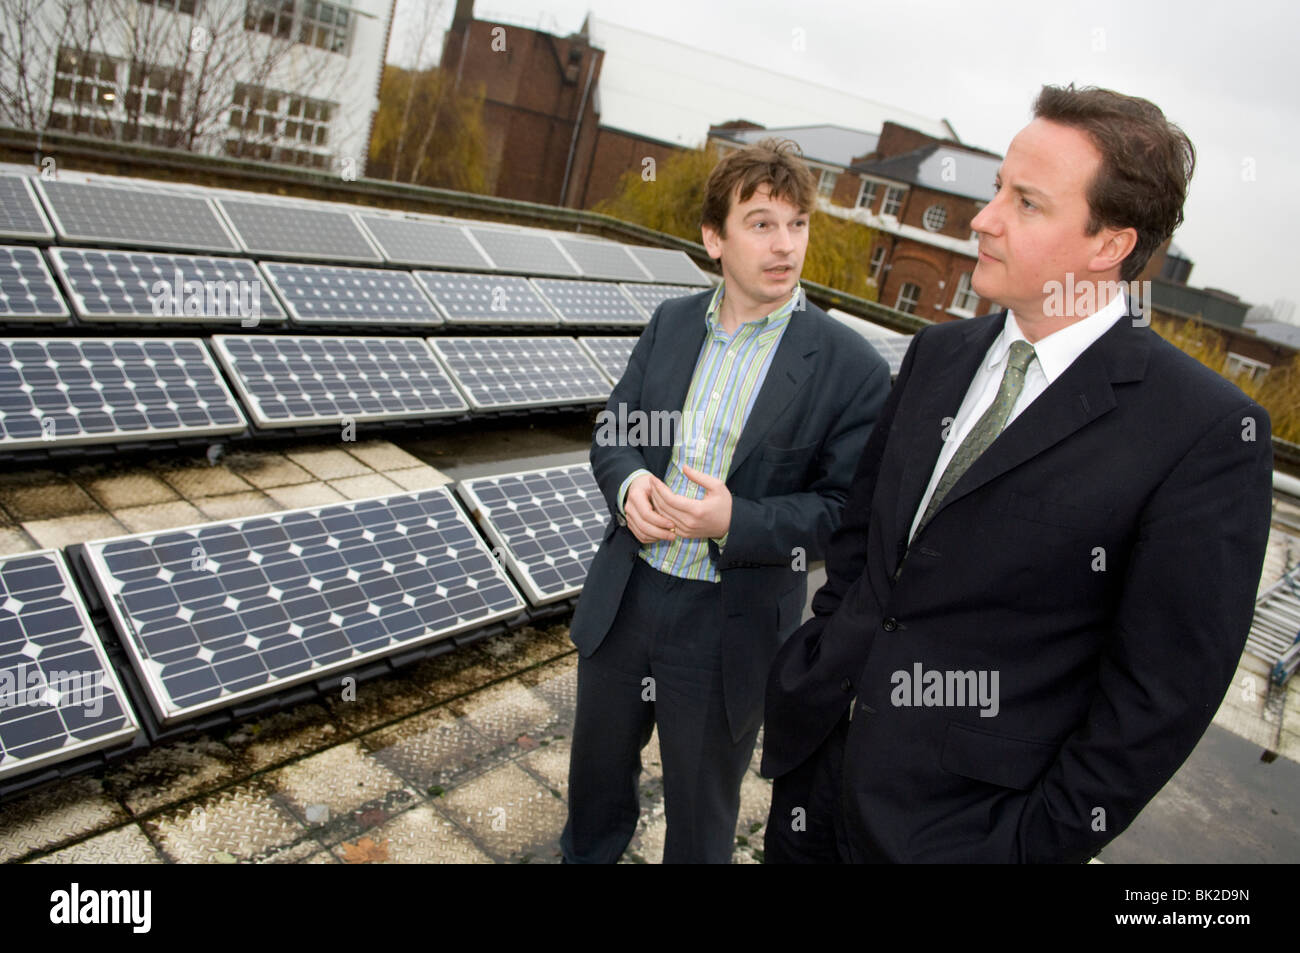 David Cameron, MP and leader of the Conservative Party, attends a meeting at the Greenpeace Stock Photo